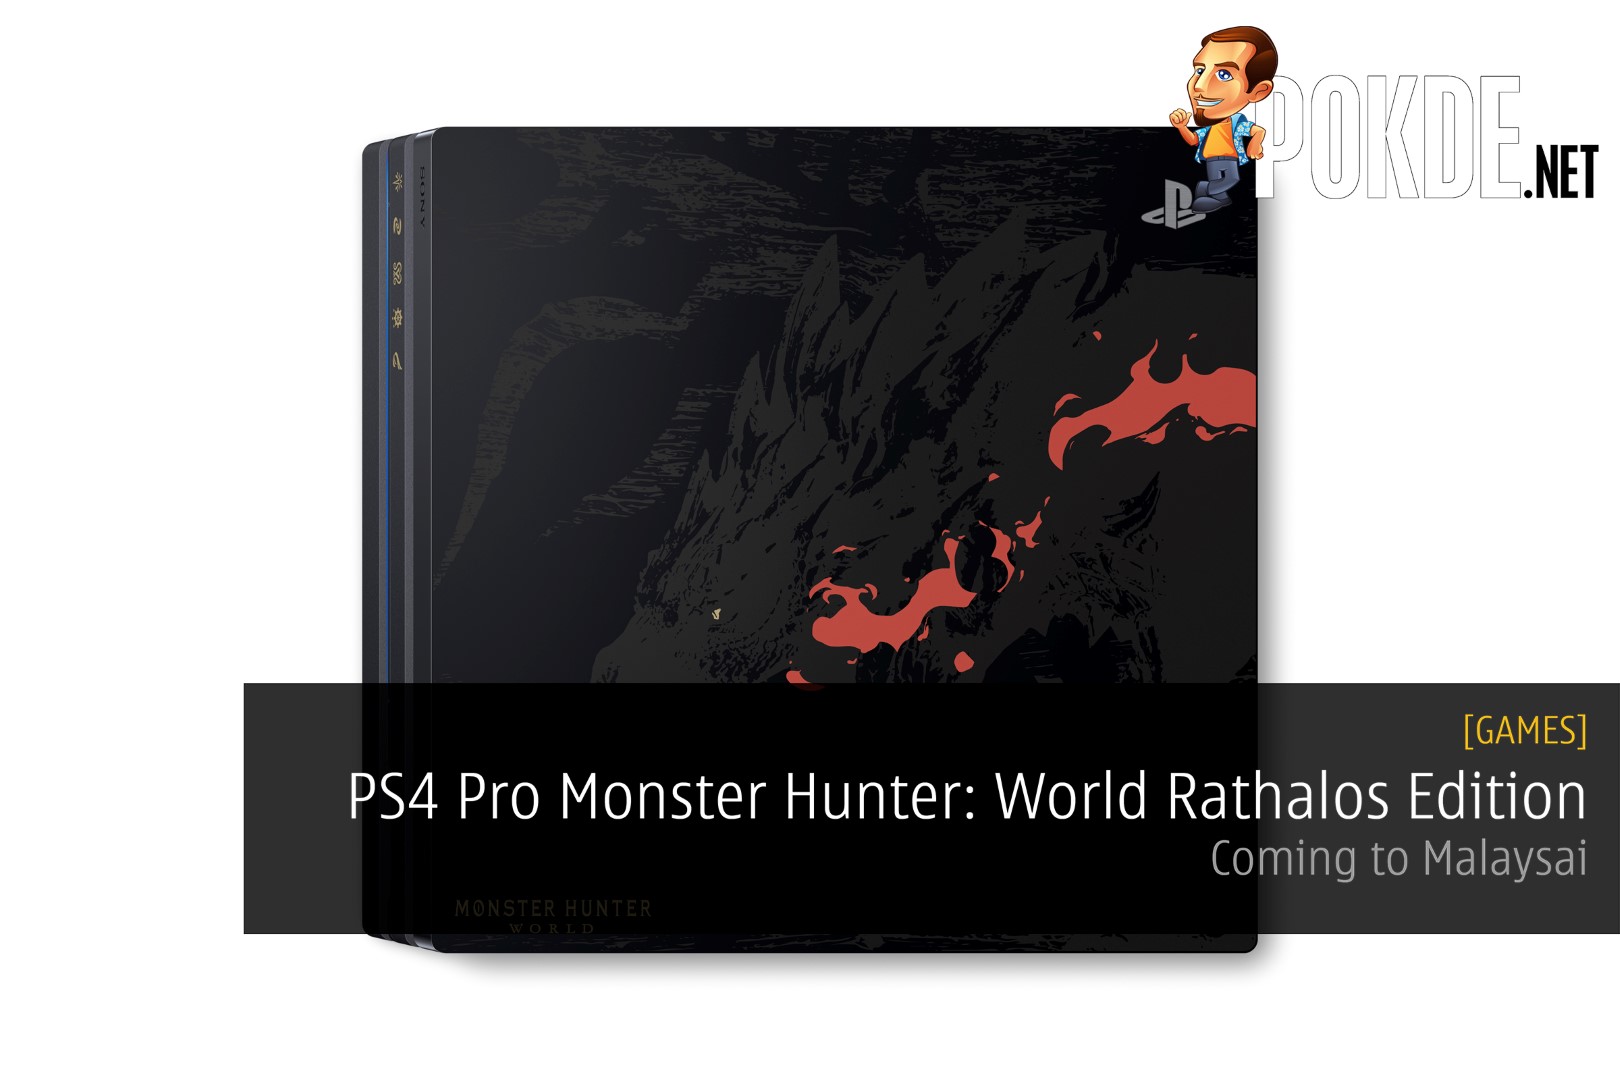 PS4 Pro Monster Hunter: World Rathalos Edition Is Coming To Malaysia! 34